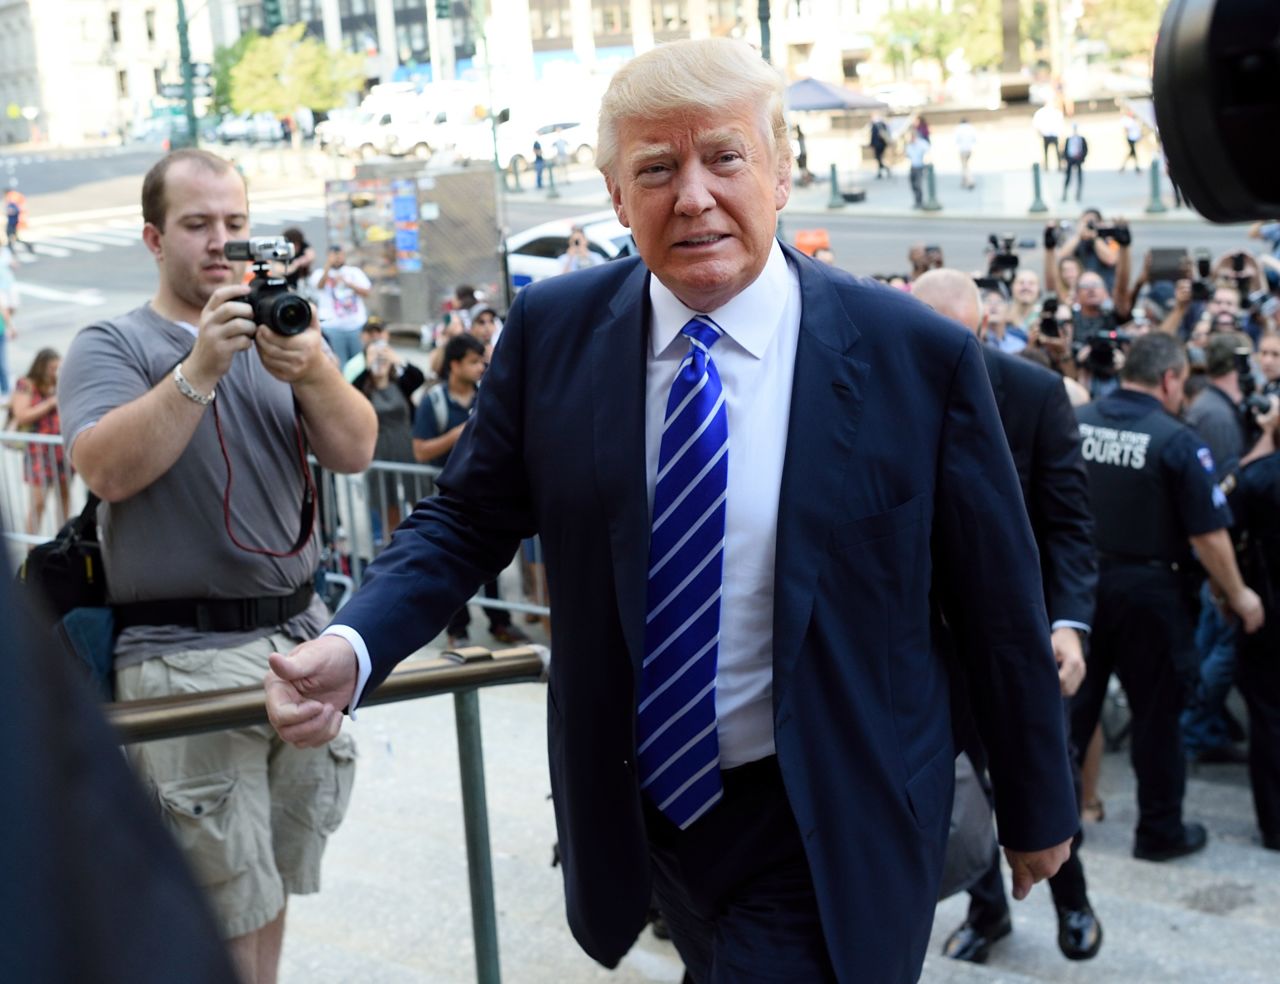 Trump arrives for jury duty in New York on August 17.